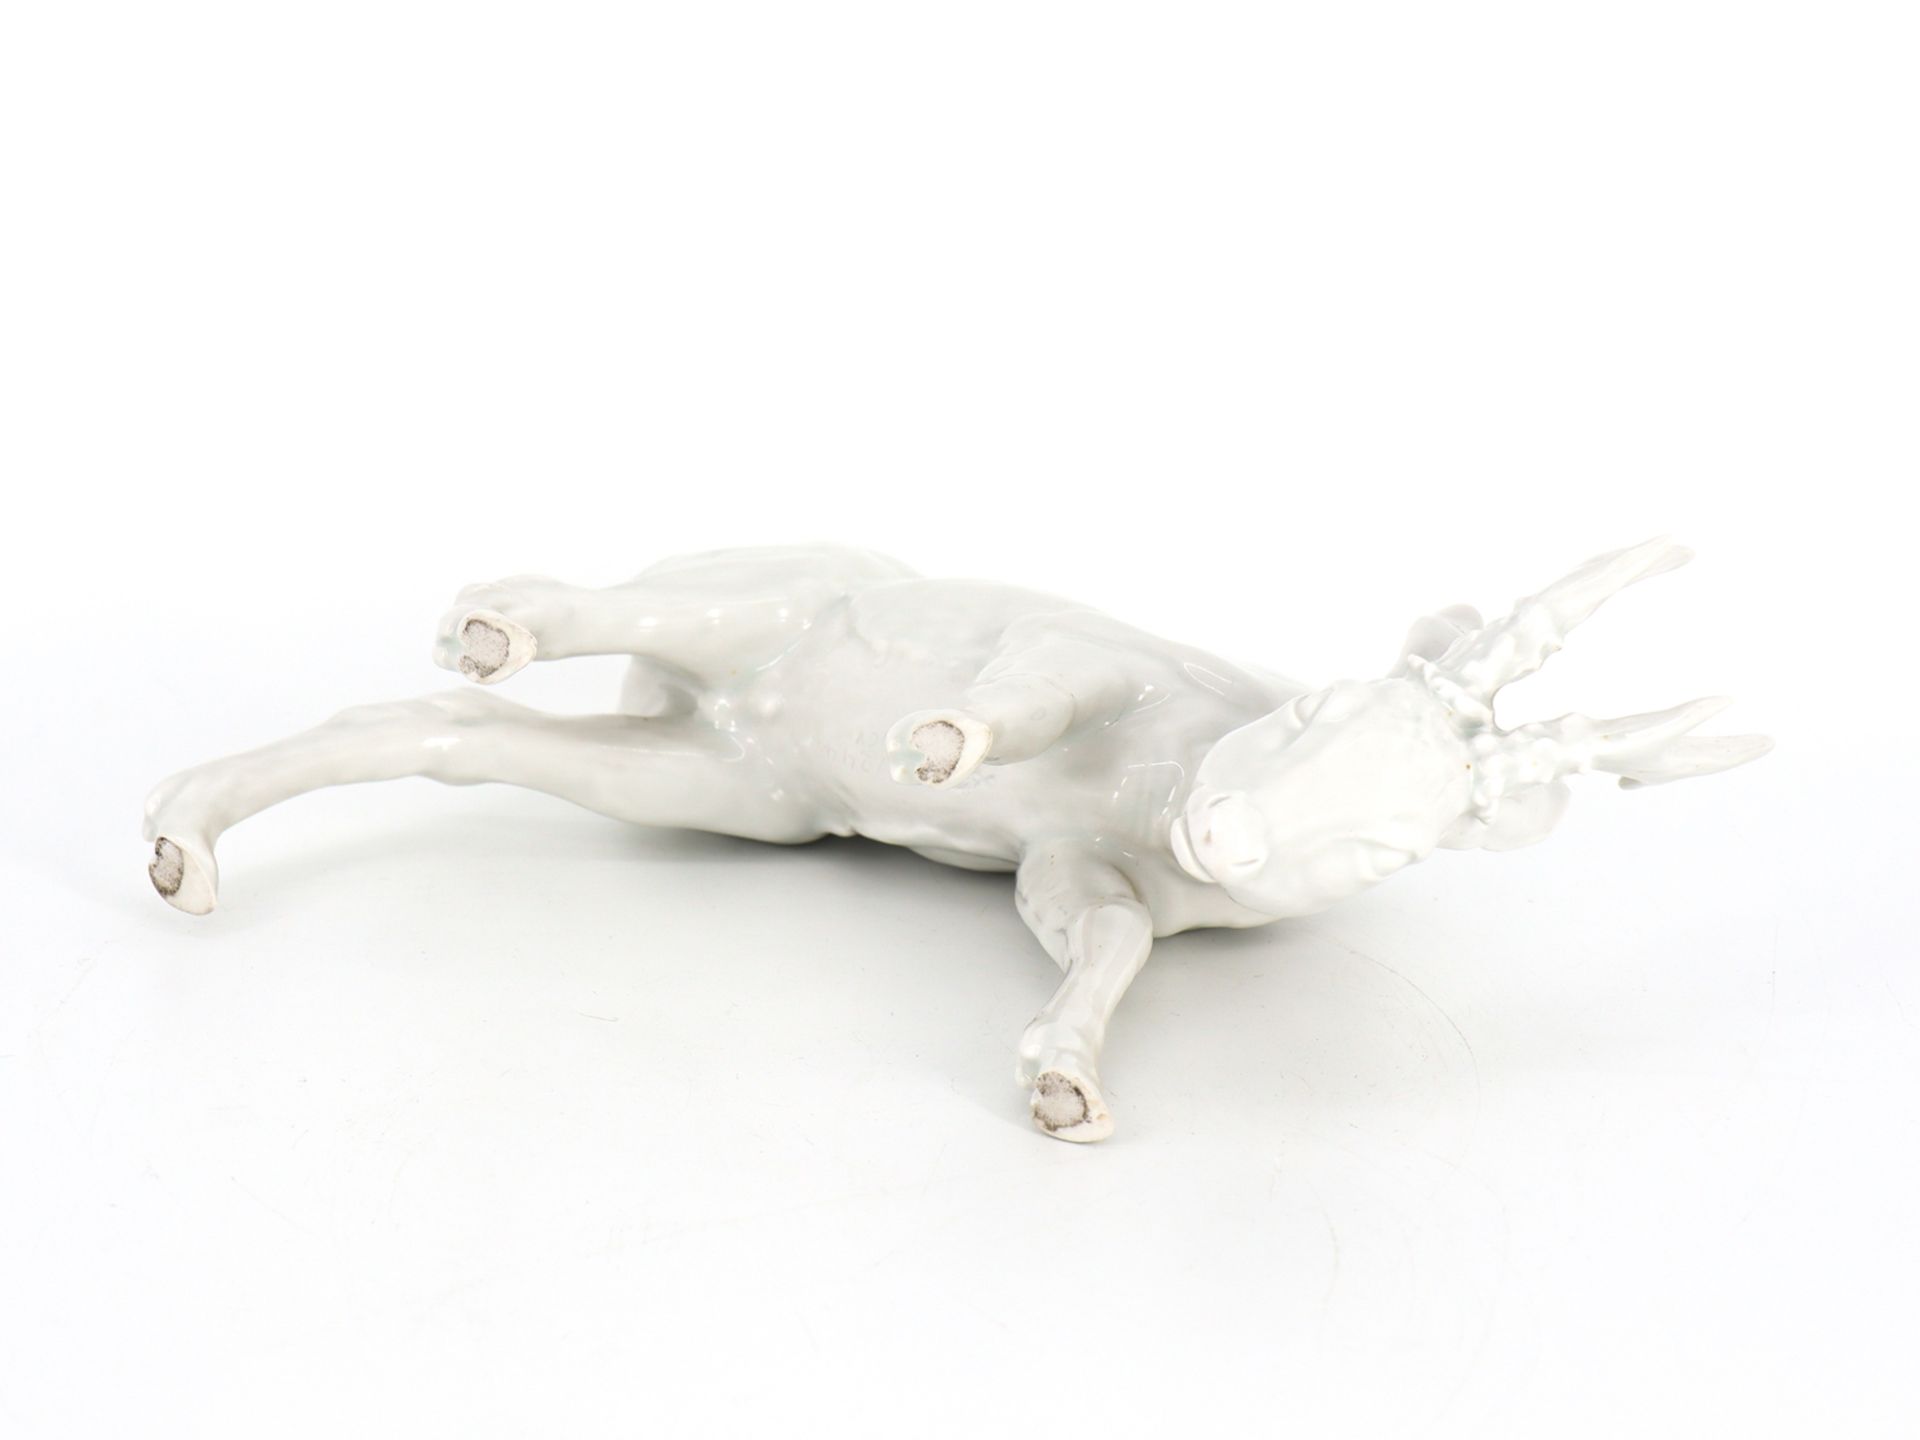 Willi Münch-Khe (1885-1960) Meissen young roebuck, design from 1938. - Image 6 of 8